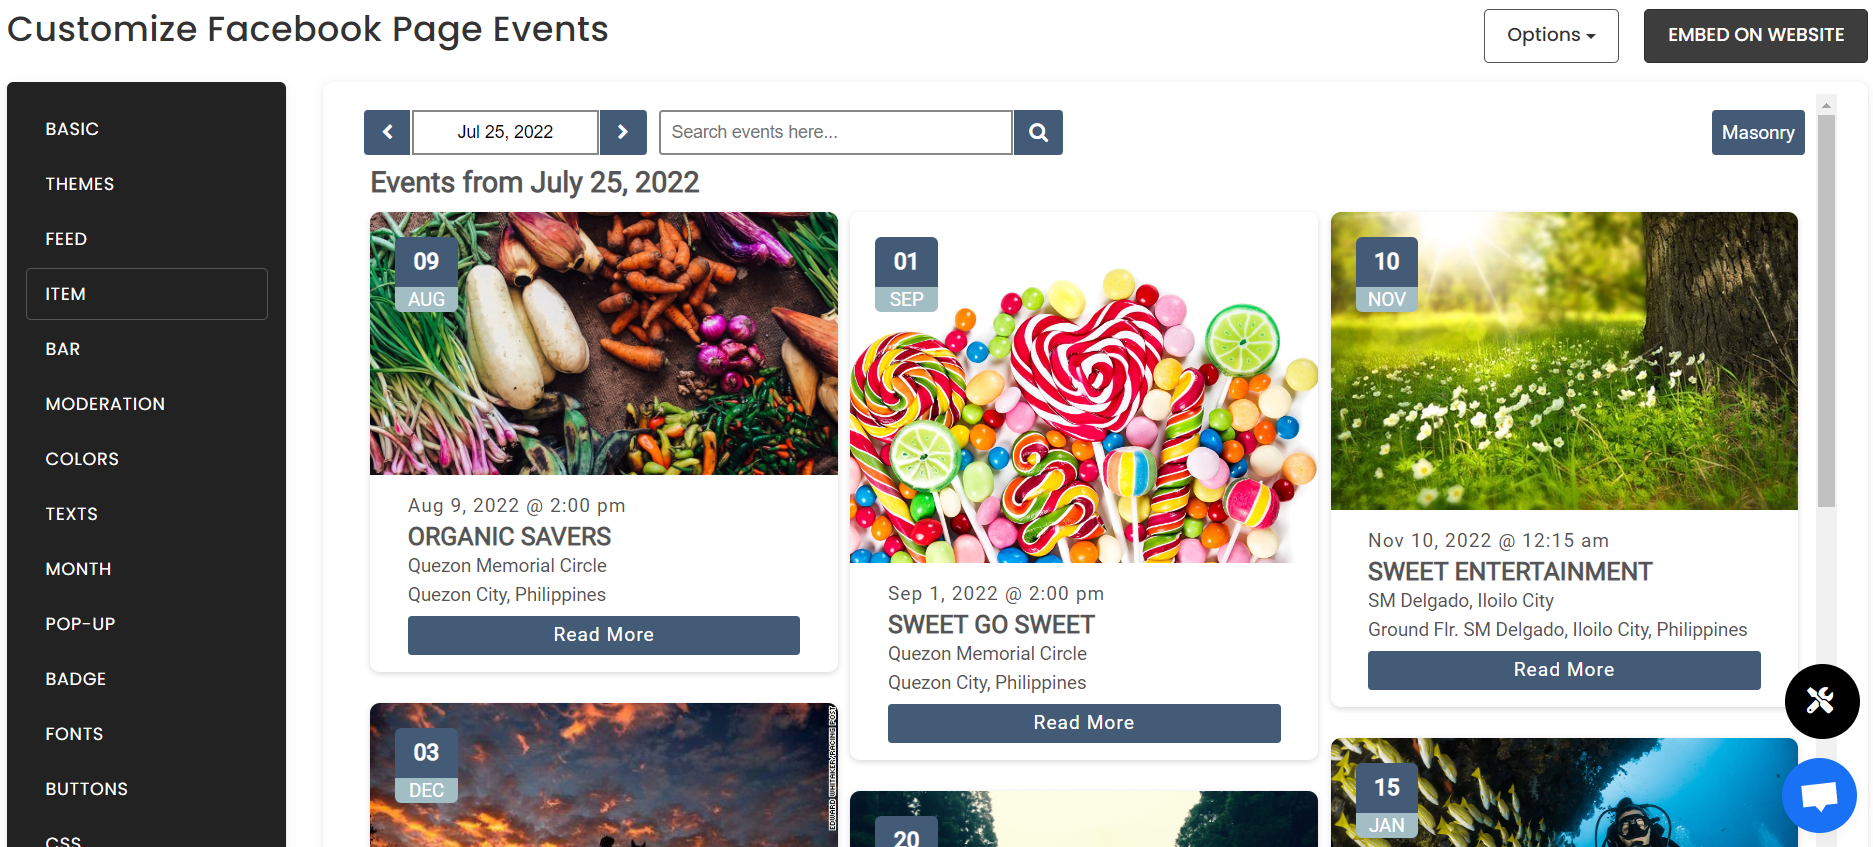 Customize your feed - How To Embed Facebook Page Events On Webflow Website For Free?